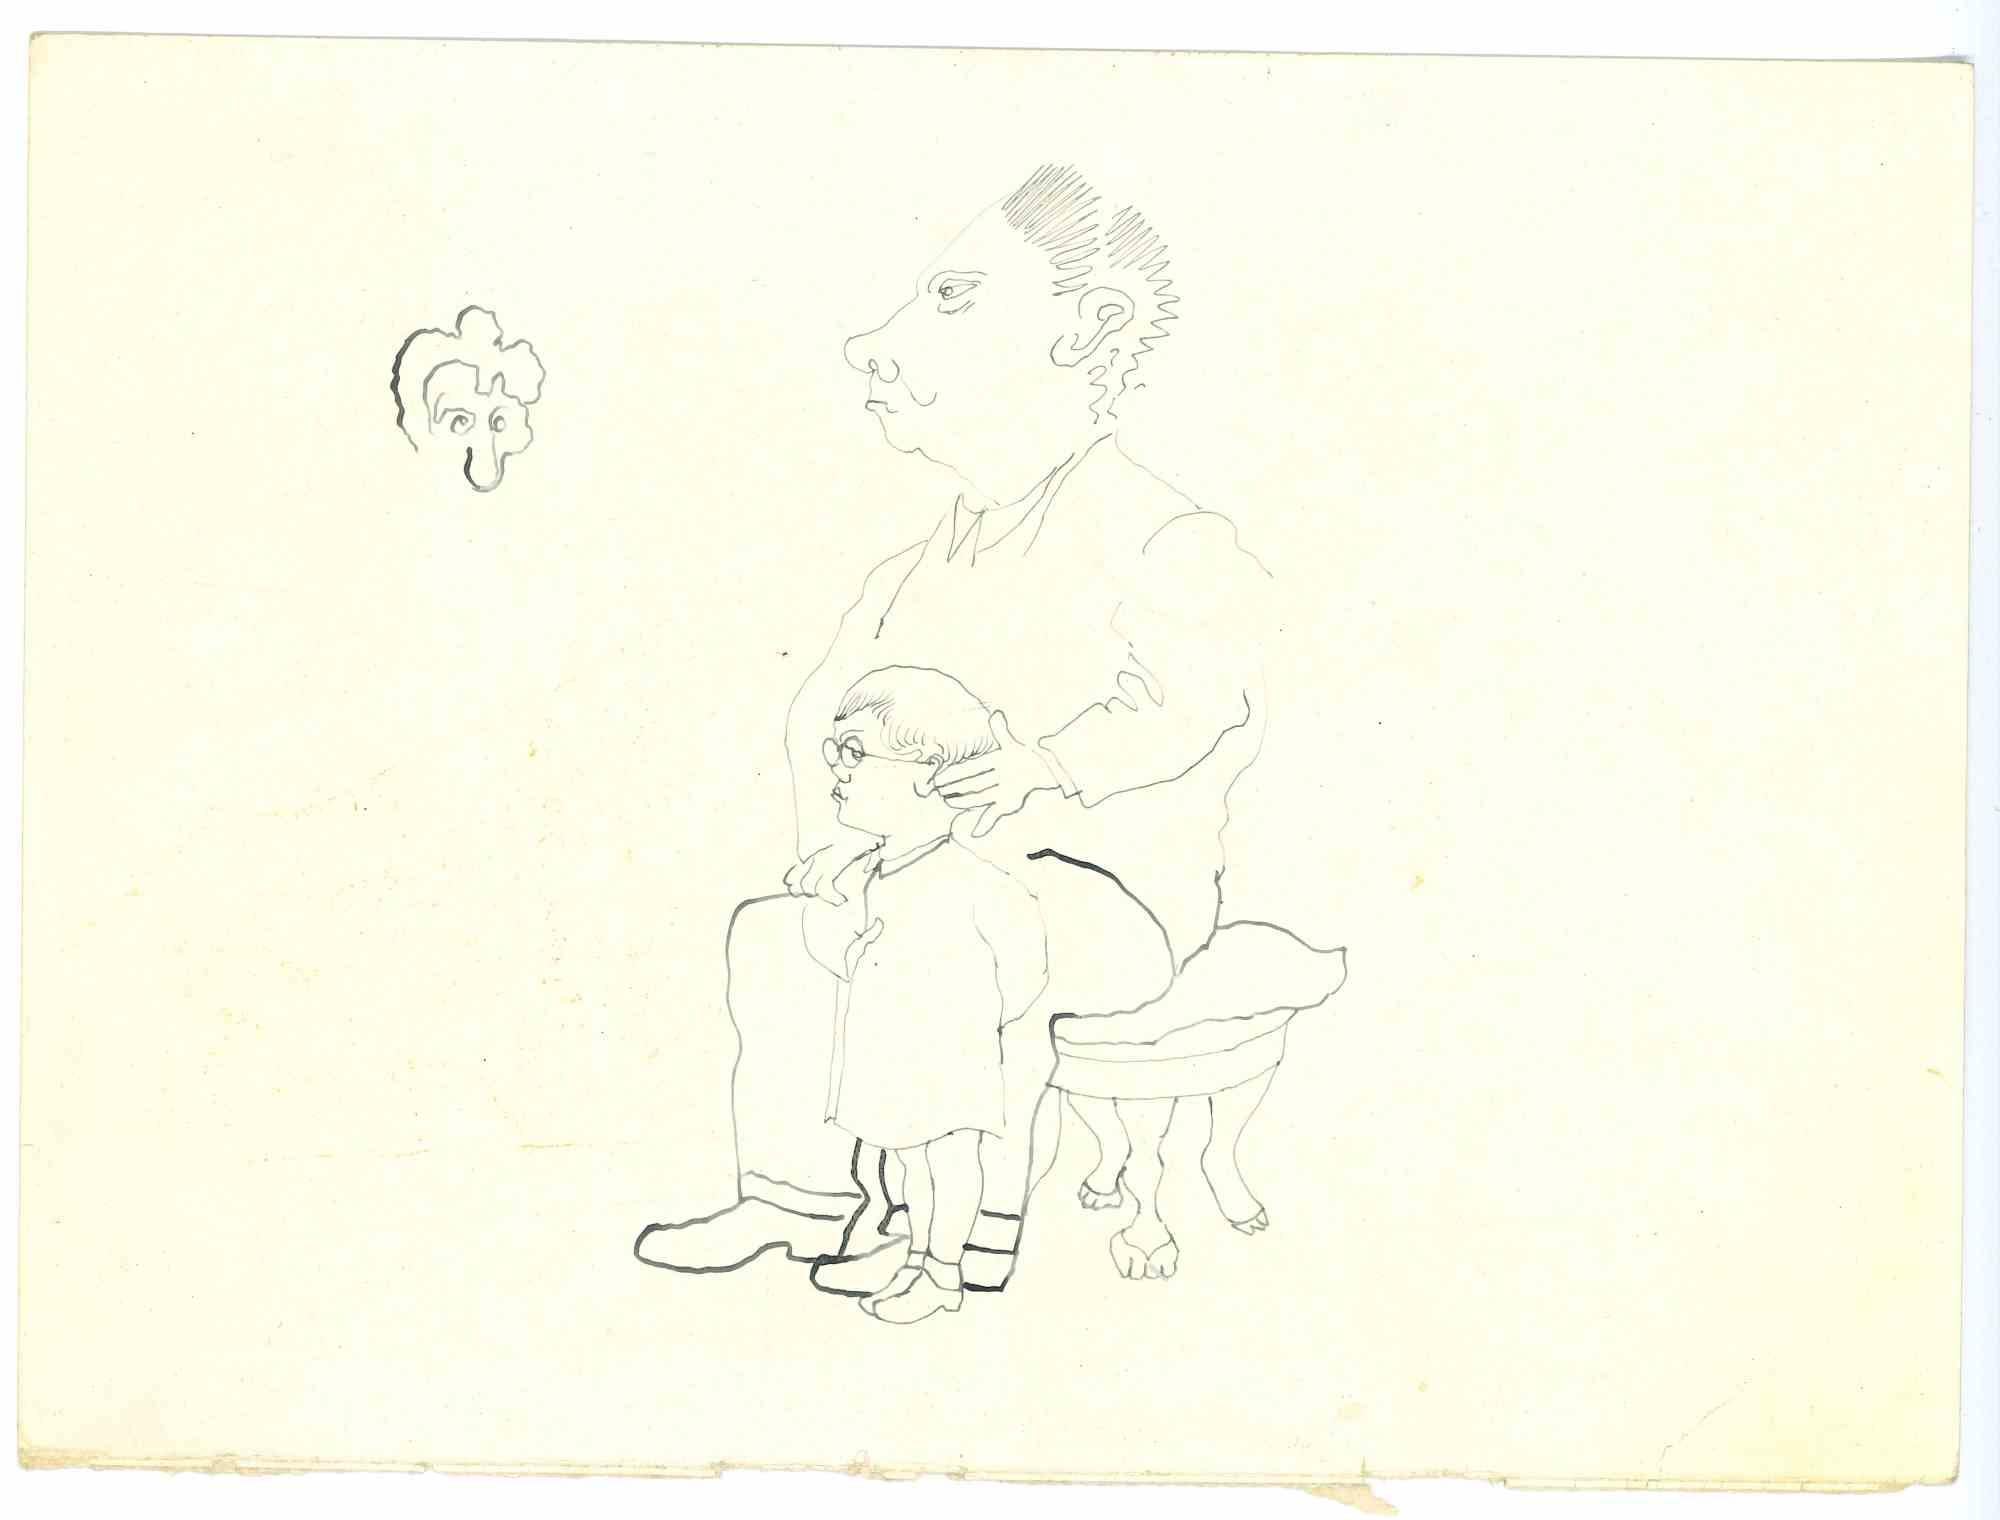 The Authority Of Fatherhood is an original Drawing in pen on creamy-colored paper realized by Mino Maccari in mid 20th century.

Good conditions.

Mino Maccari (1898-1989) was an Italian writer, painter, engraver and journalist, winner the